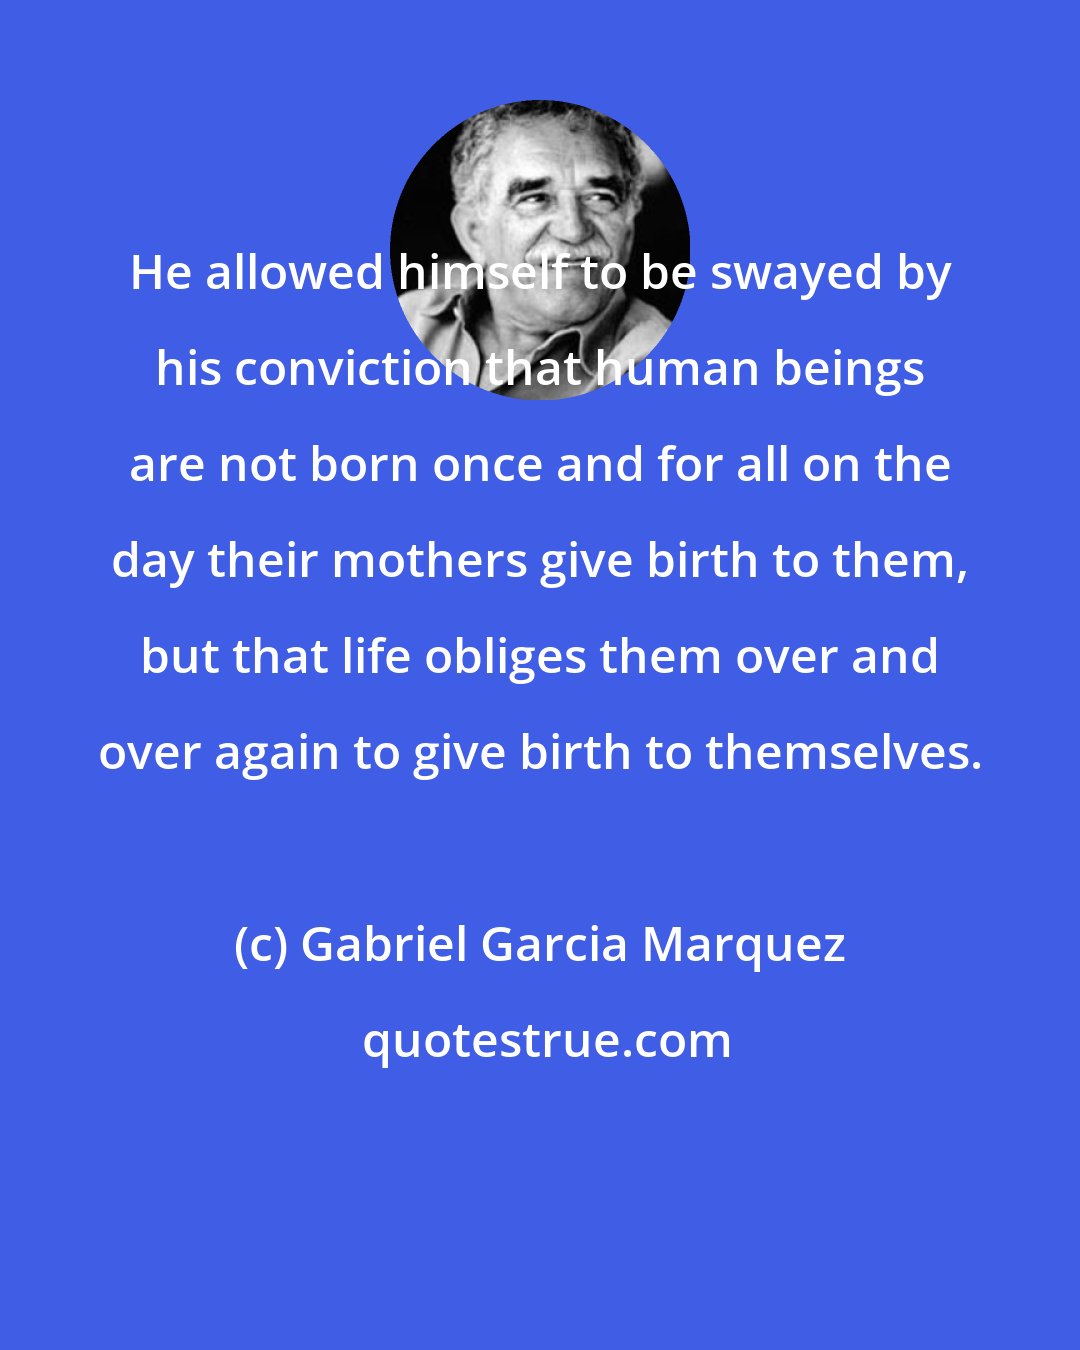 Gabriel Garcia Marquez: He allowed himself to be swayed by his conviction that human beings are not born once and for all on the day their mothers give birth to them, but that life obliges them over and over again to give birth to themselves.